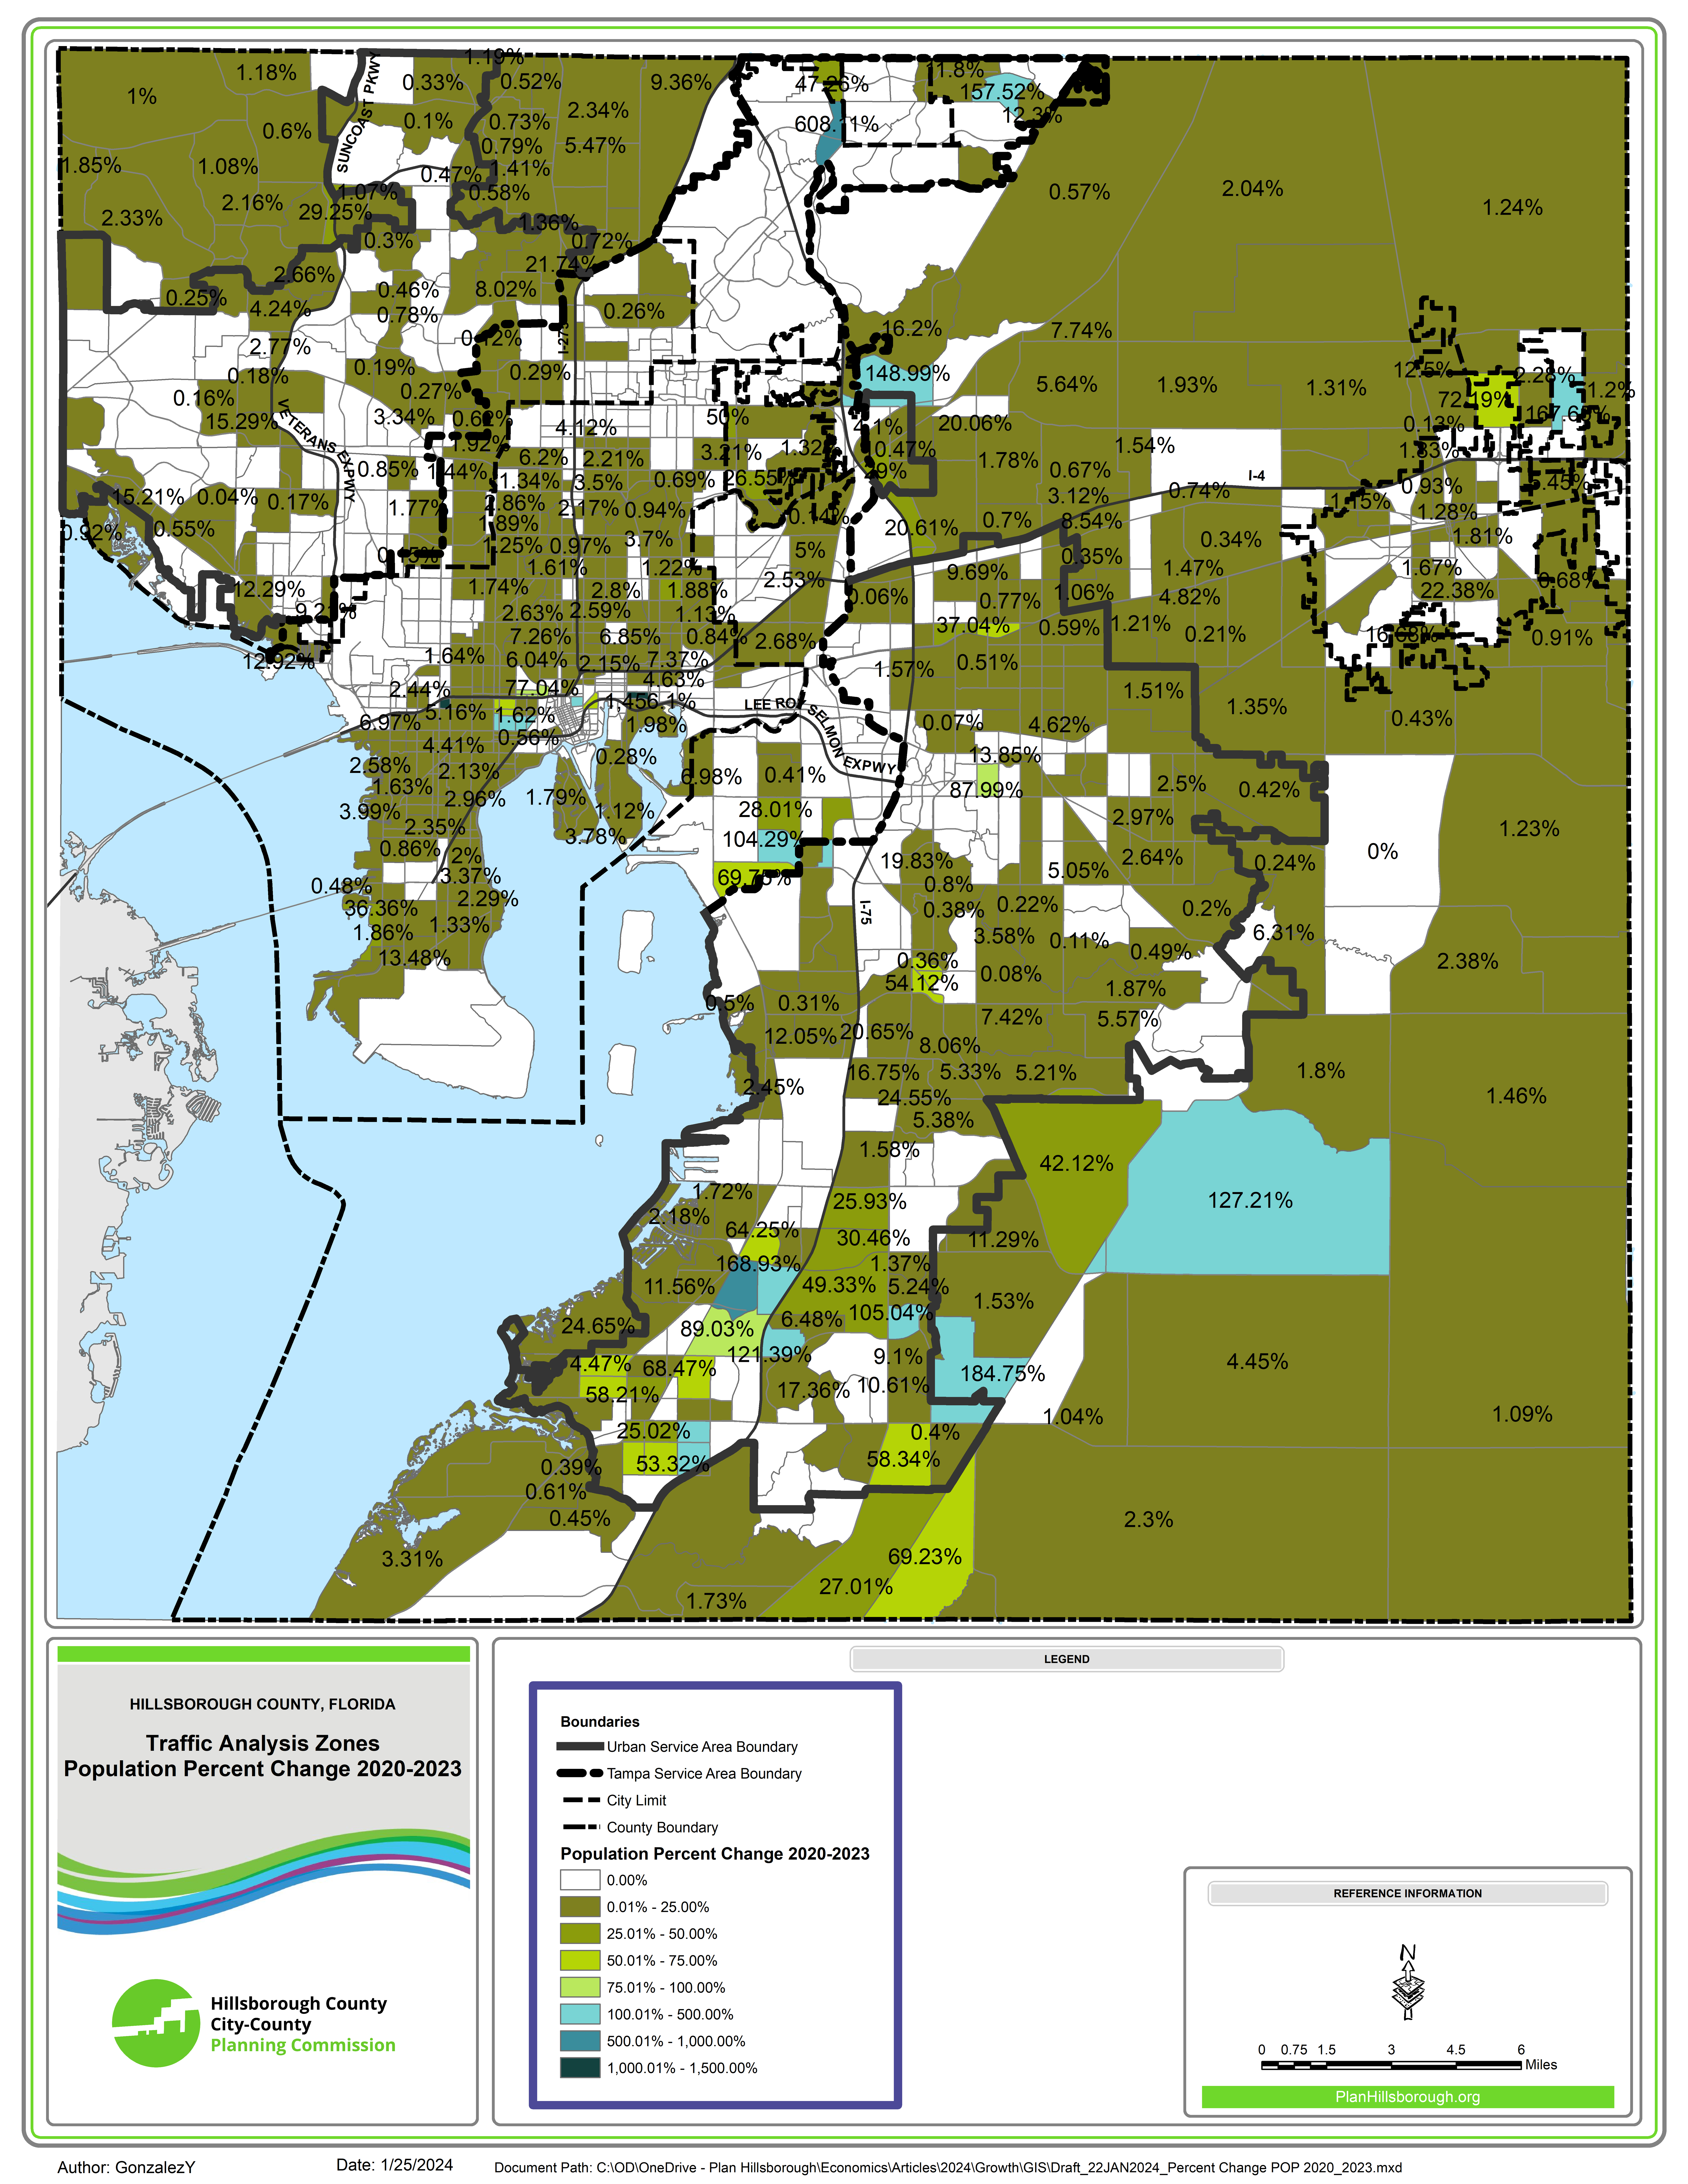 This map shows 2020-2023 percent change in population by Traffic Analysis Zones within Hillsborough County. Darker zones denote higher percent change in population..